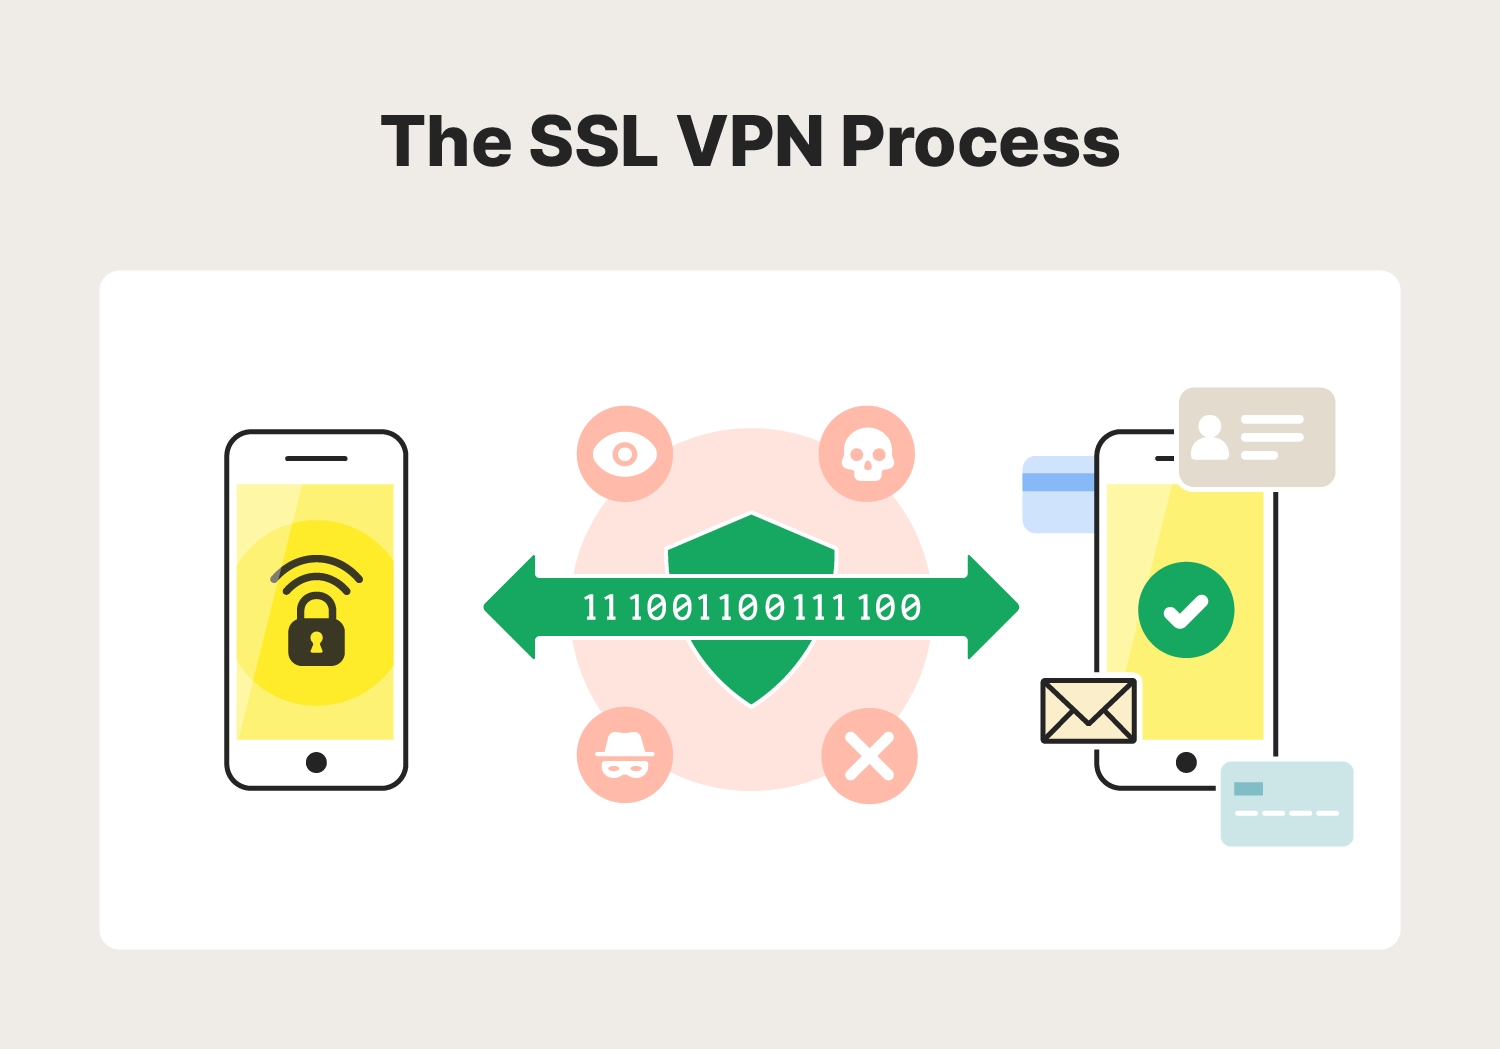 A visual demonstrating how the SSL VPN works to encrypt traffic traveling between devices and the internet.